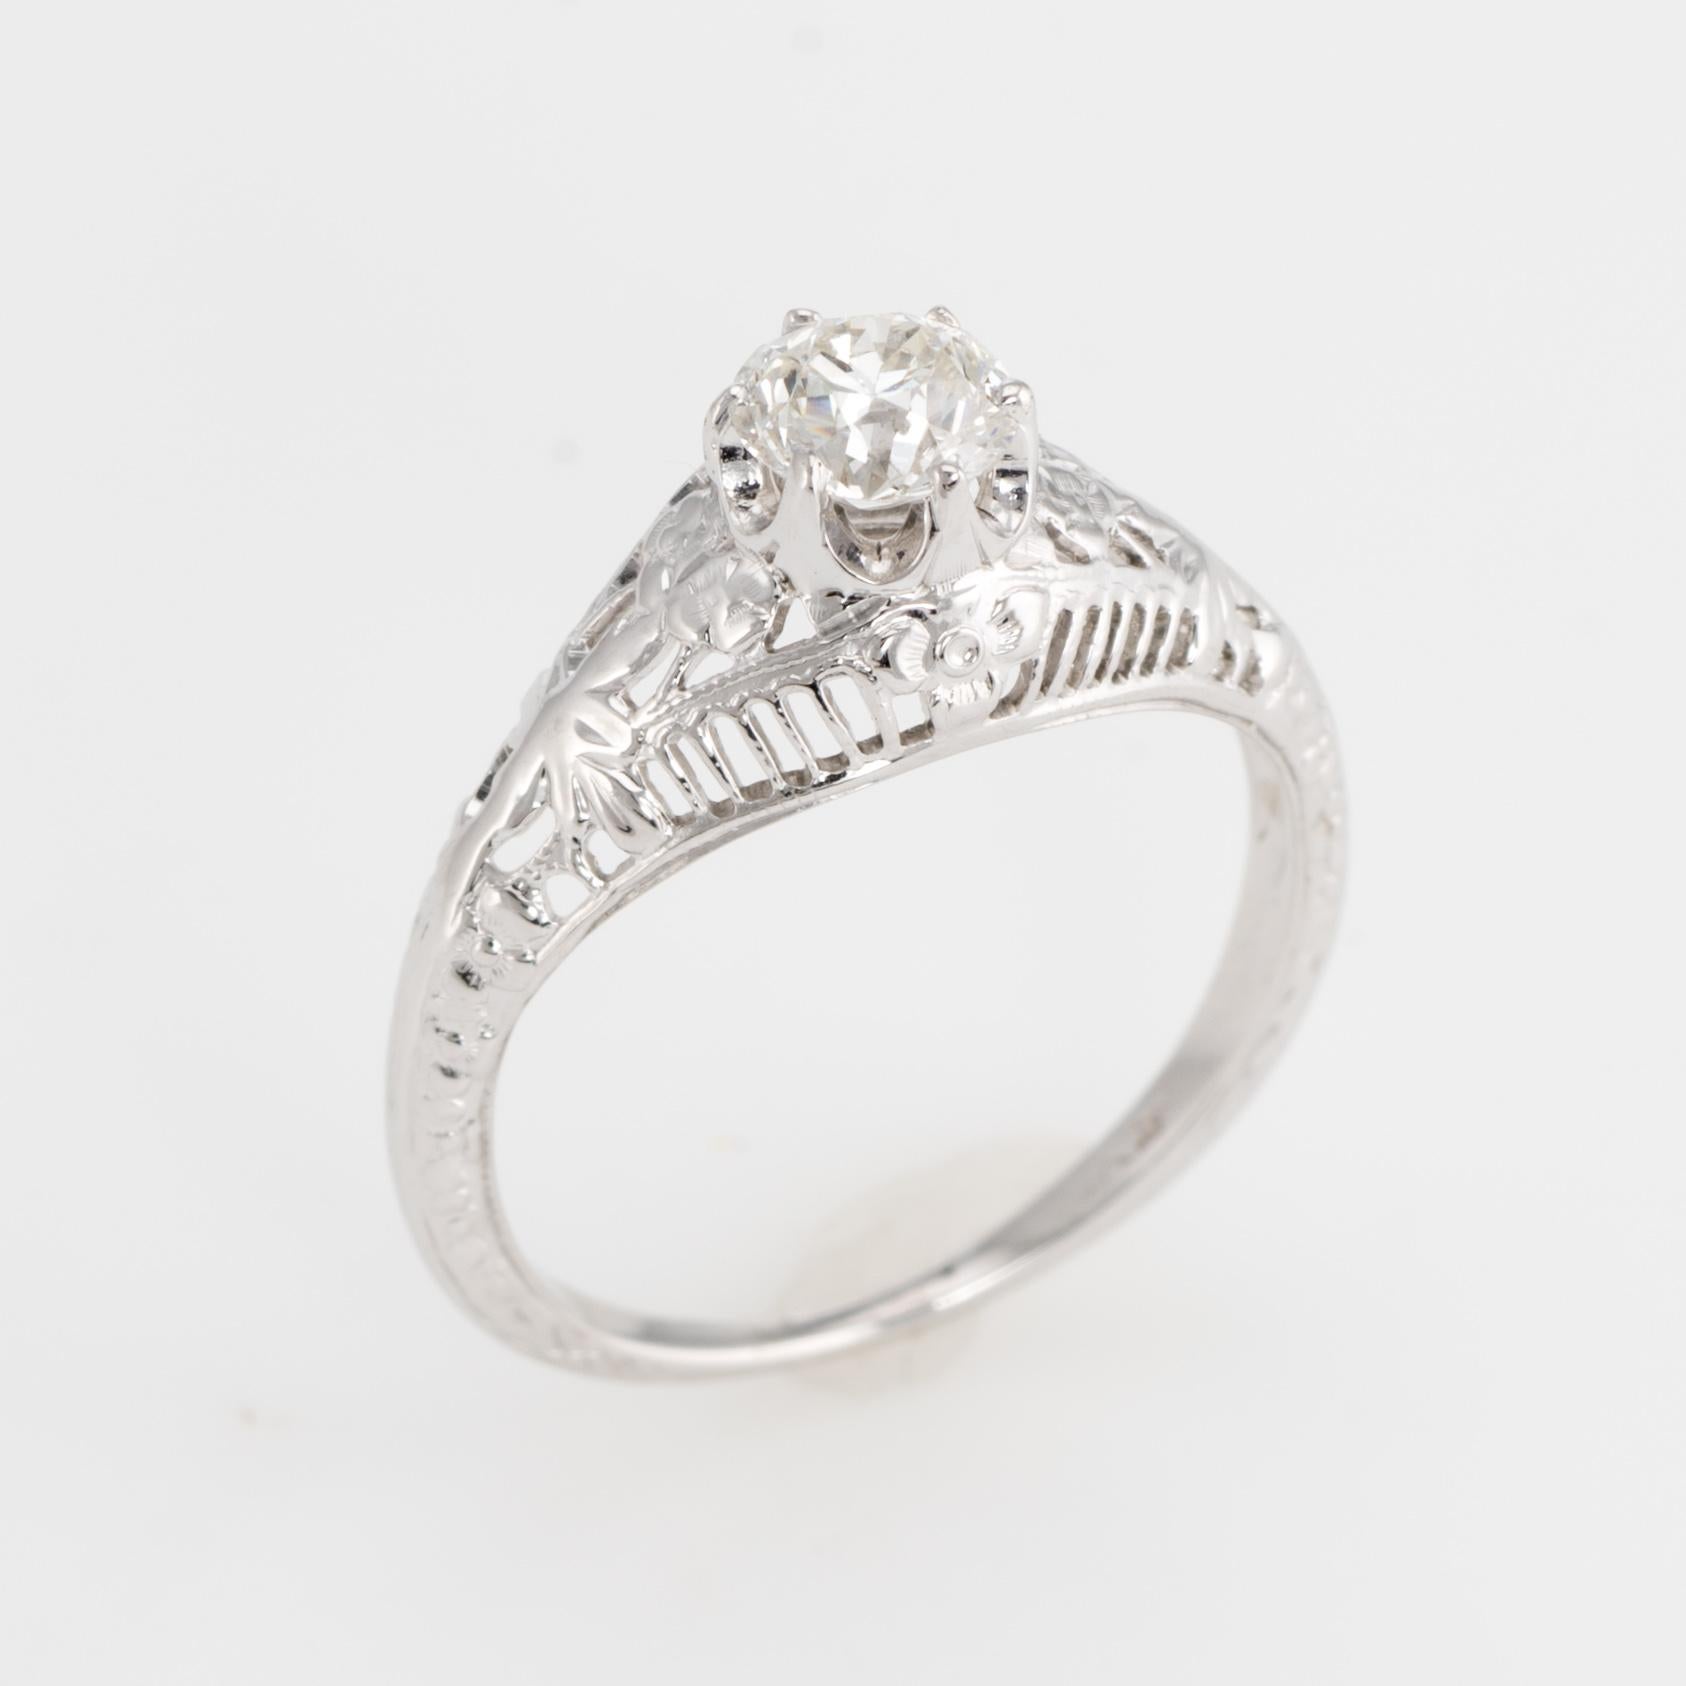 Elegant & finely detailed Art Deco era ring (circa 1920s to 1930s), crafted in 14 karat white gold. 

Centrally mounted estimated 0.50 carat Old Mine cut (estimated at H-I color and VS2 clarity).   

The ring epitomizes vintage charm and would make